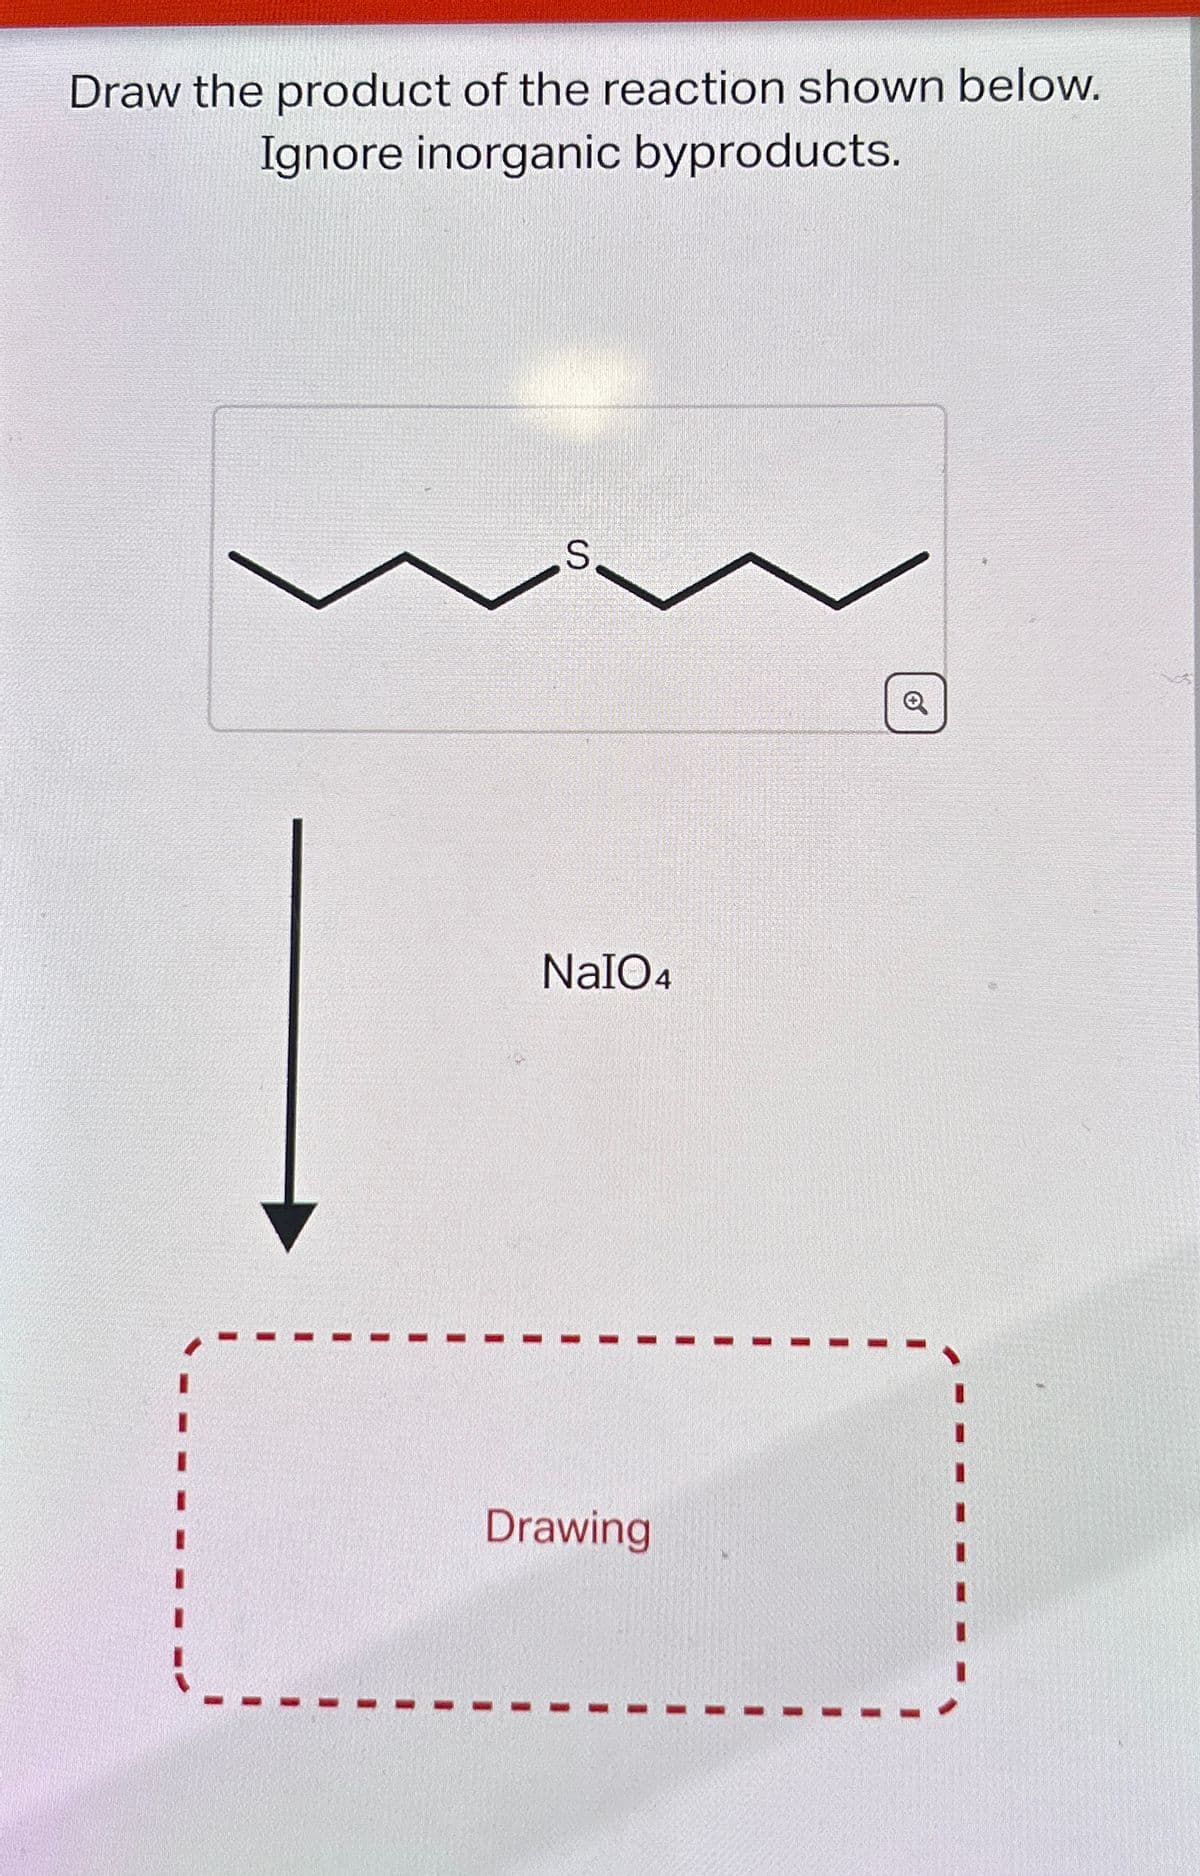 Draw the product of the reaction shown below.
Ignore inorganic byproducts.
S
NaIO4
Drawing
Q